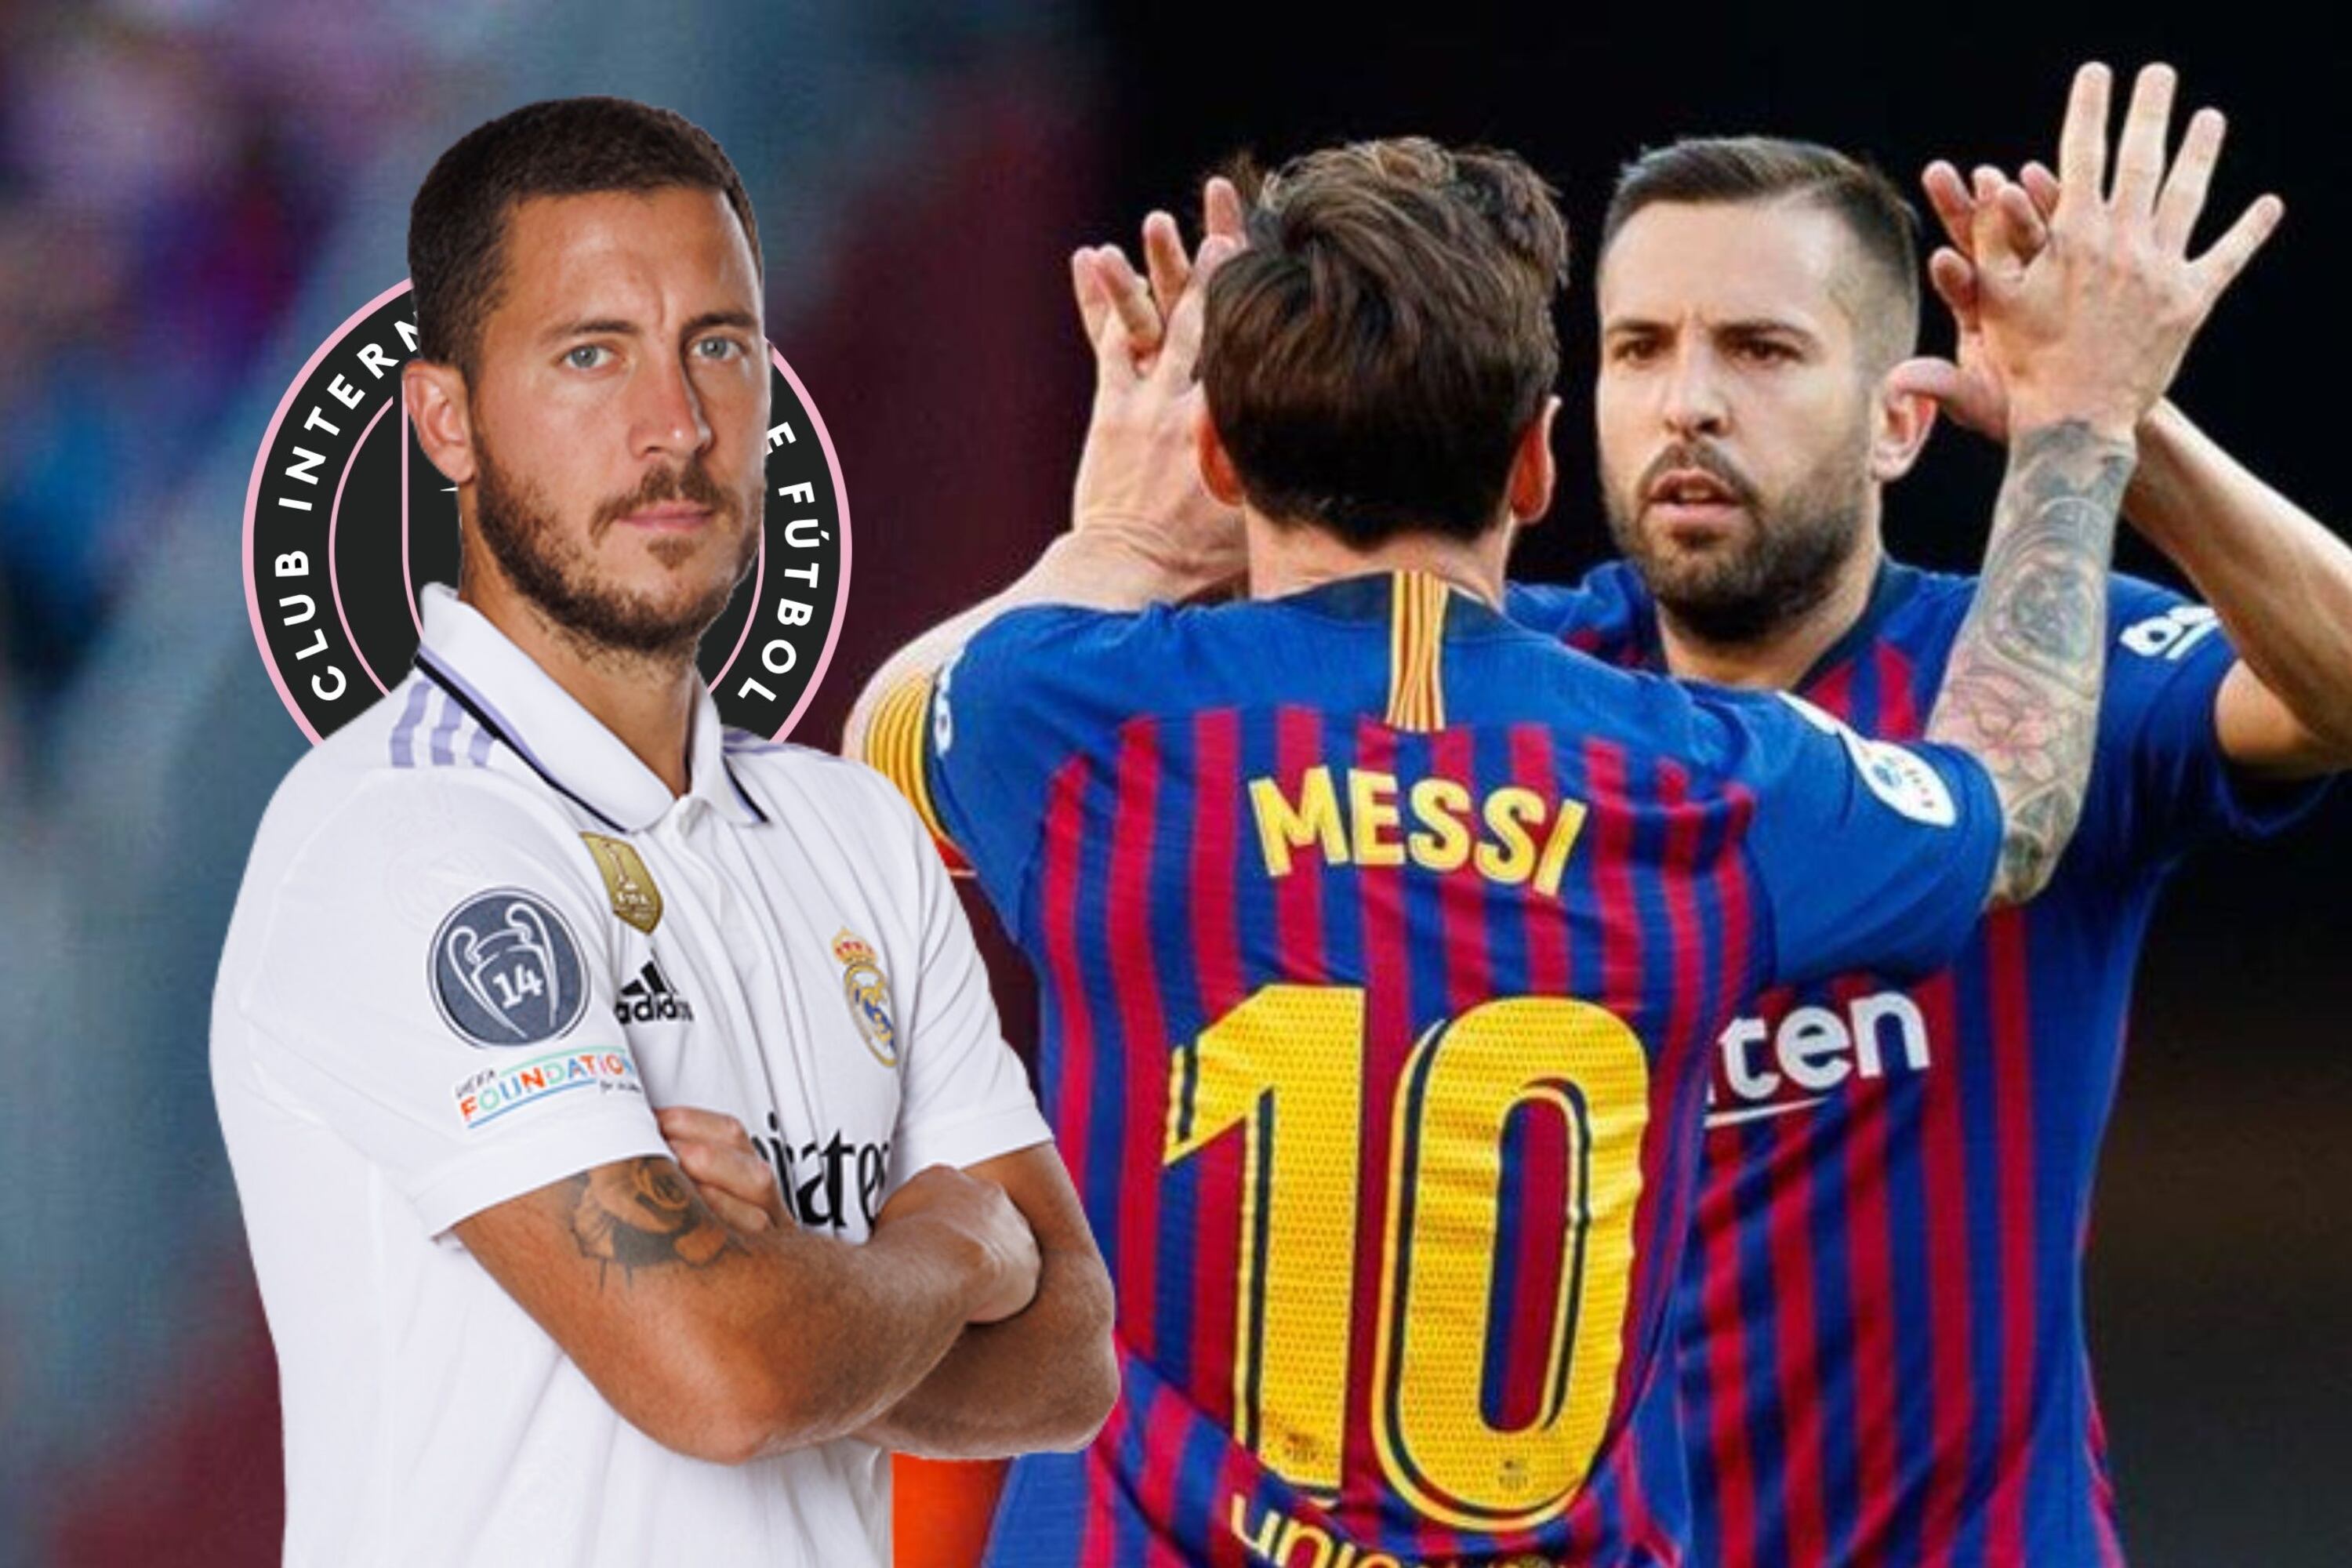 With Jordi Alba set to play alongside Lionel Messi, Eden Hazard's decision to sign for Inter Miami